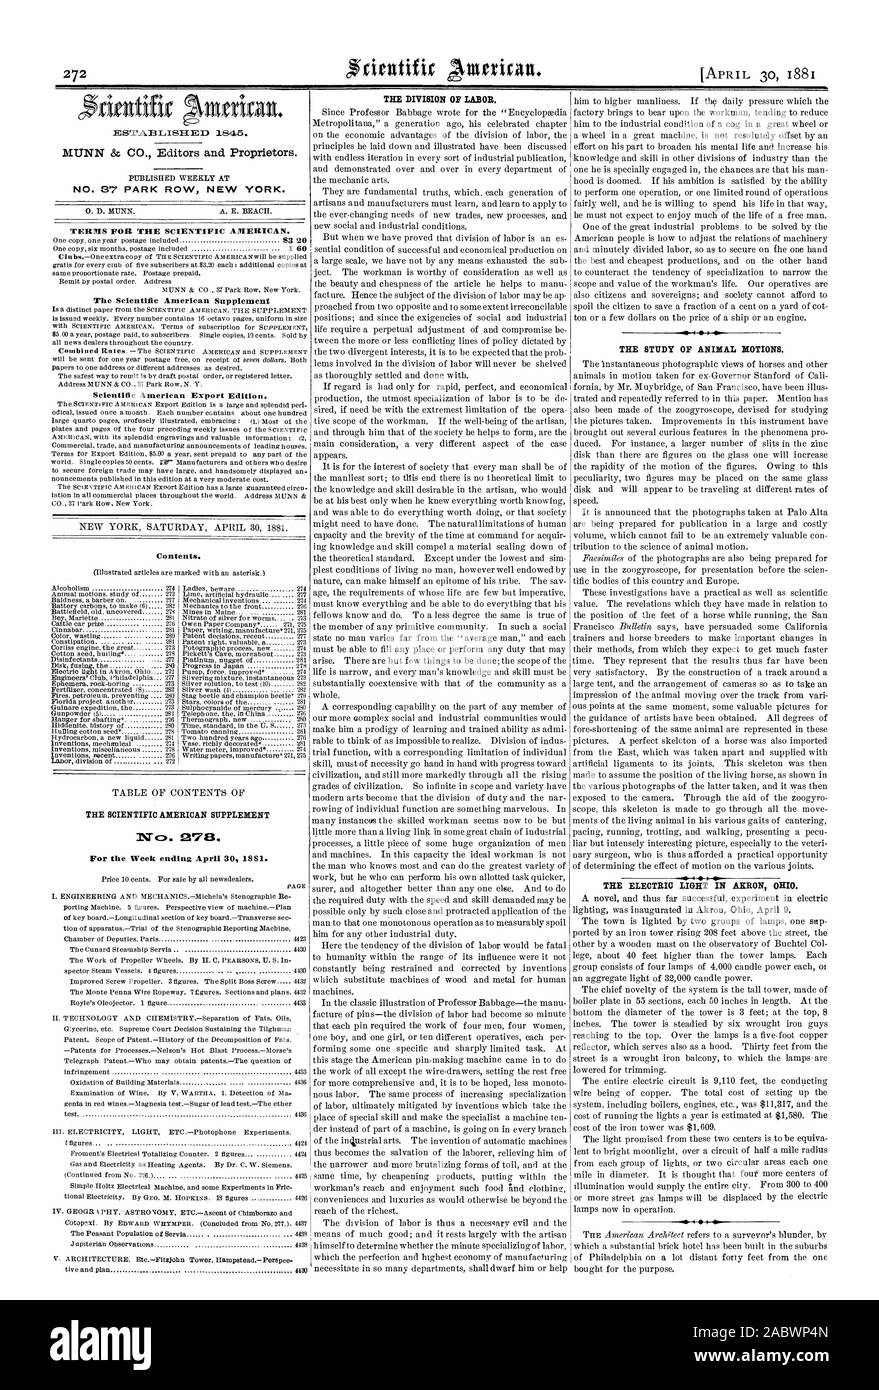 MUNN & CO. Editors and Proprietors. NO. 87 PARK ROW NEW YORK. The Scientific American Supplement Scientific American Export Edition. Contents. THE SCIENTIFIC AMERICAN SUPPLEMENT 1Vo. 078. For the Week ending April 30 1881. THE DIVISION OF LABOR. THE STUDY OF ANIMAL MOTIONS. I  THE ELECTRIC LIGHT IN AKRON OHIO., 1881-04-30 Stock Photo